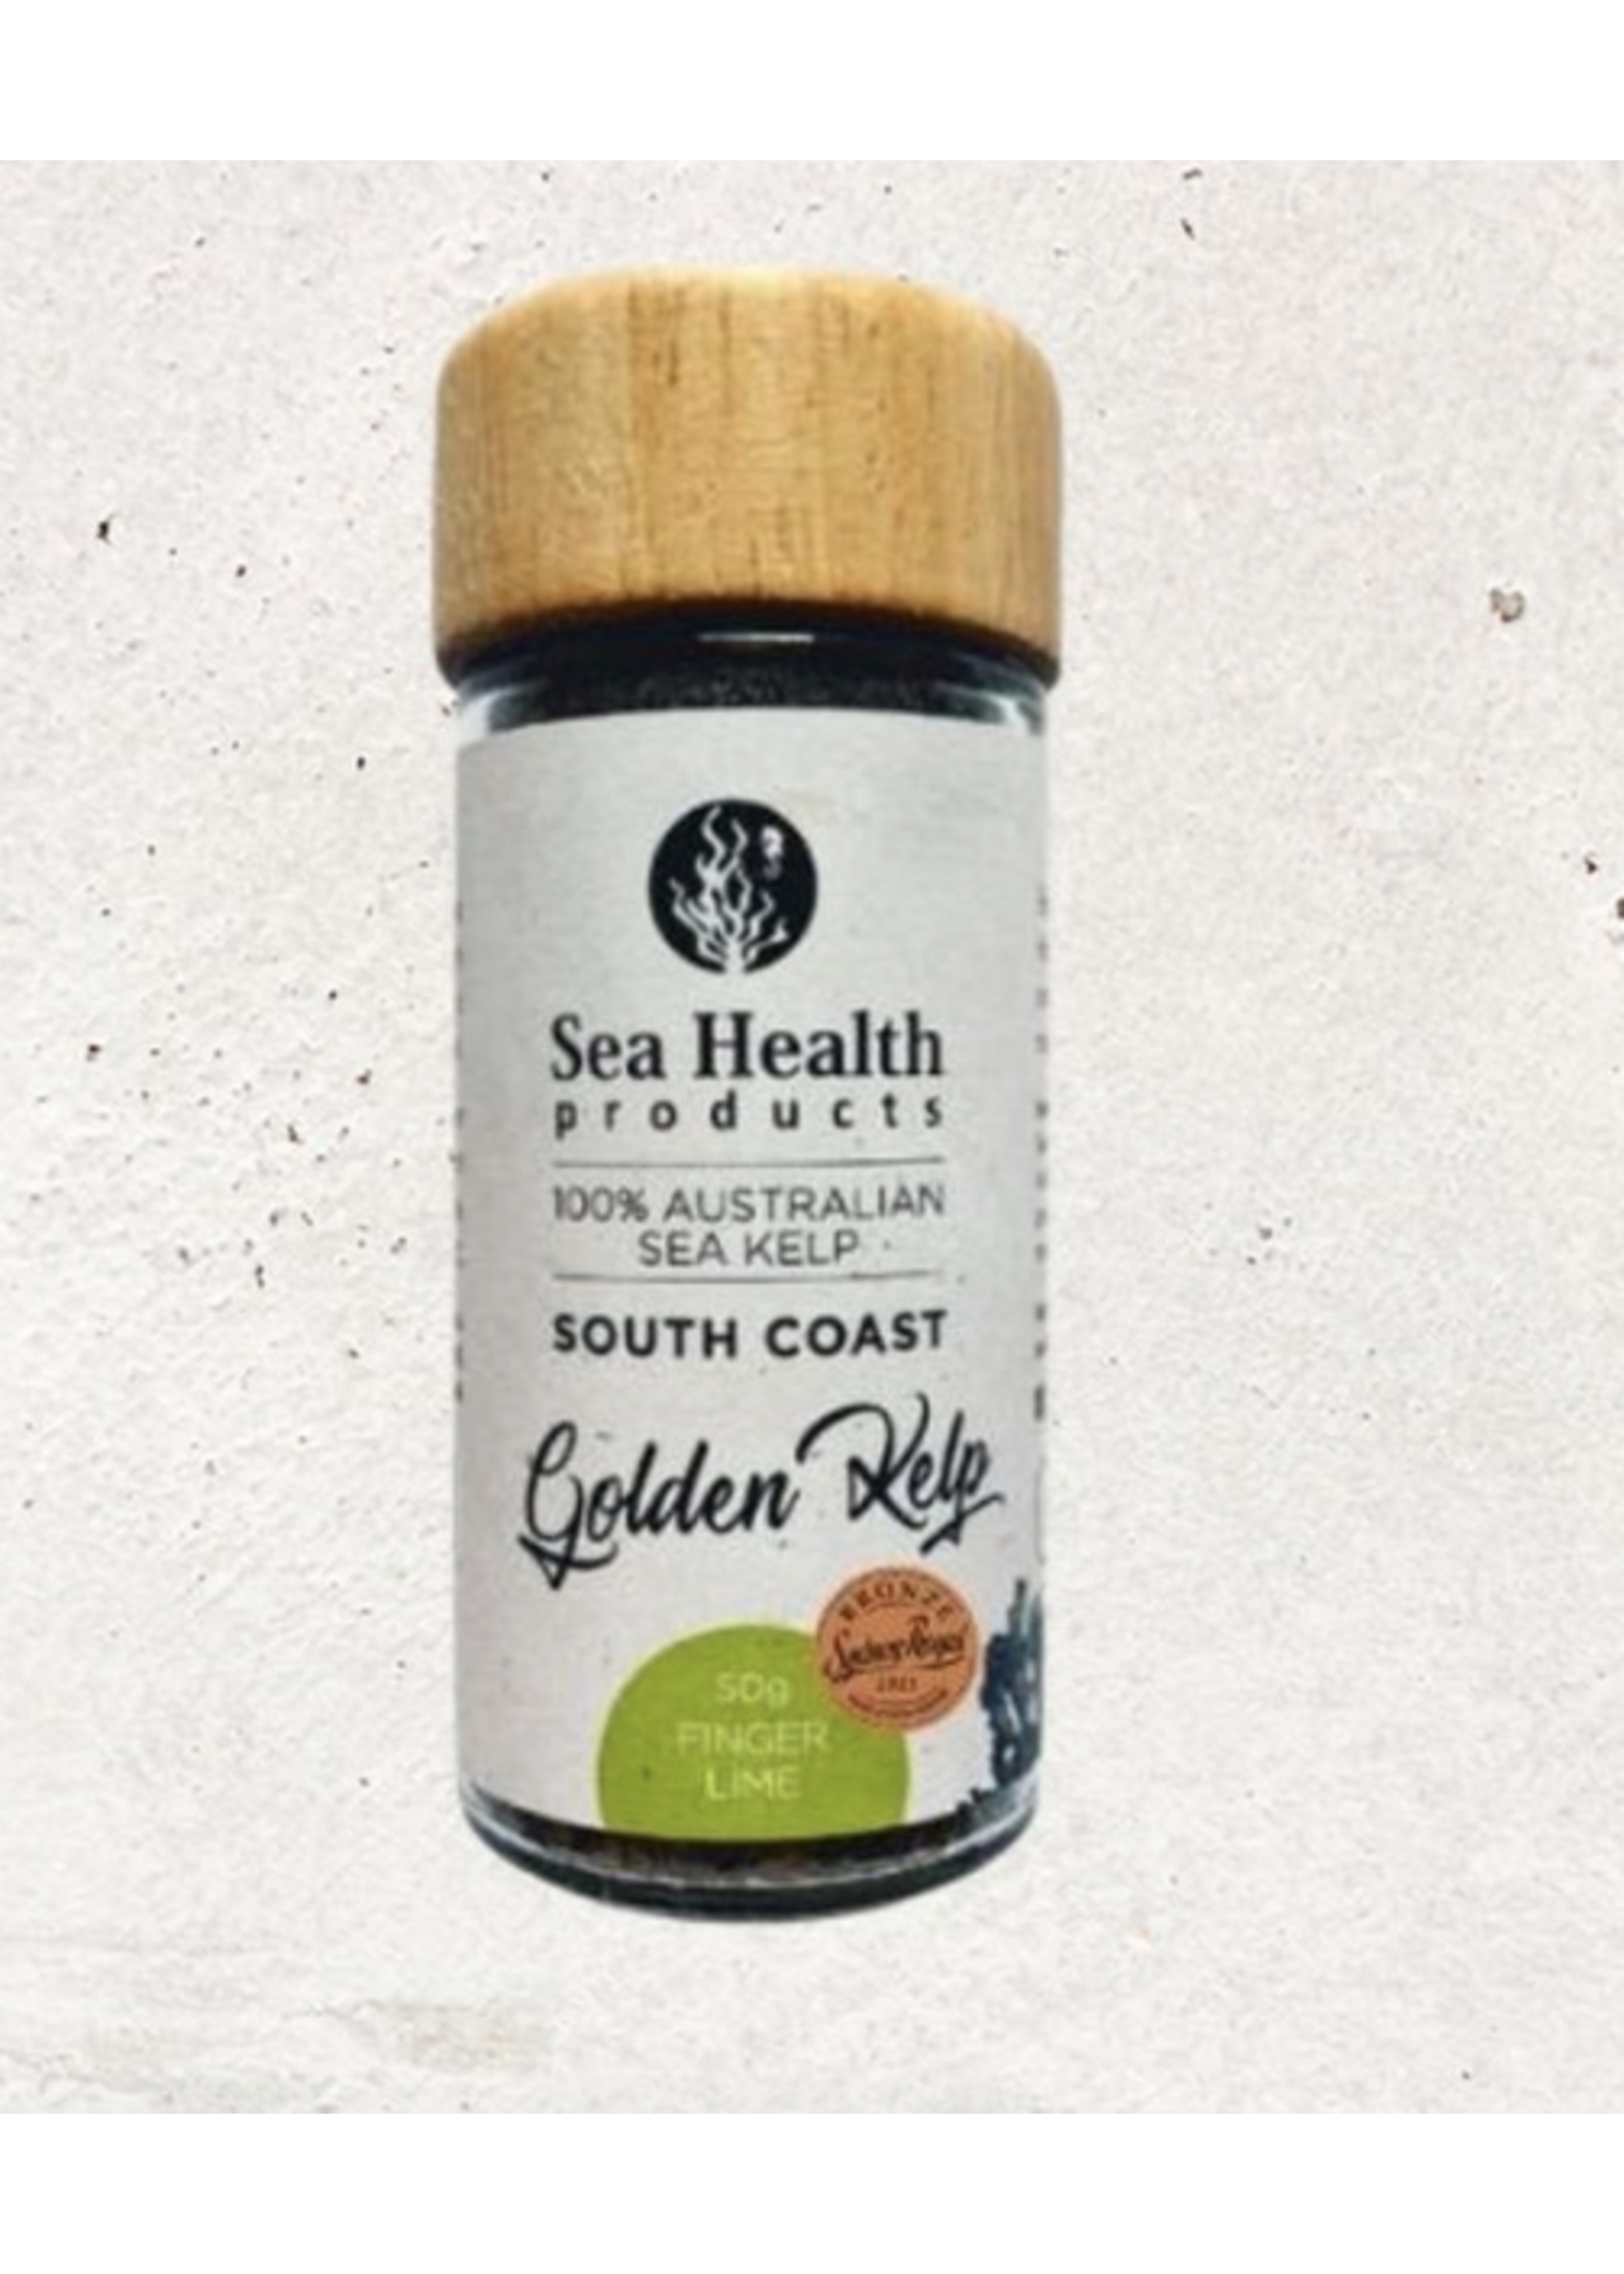 Sea Health Products Golden Kelp 50g Finger Lime